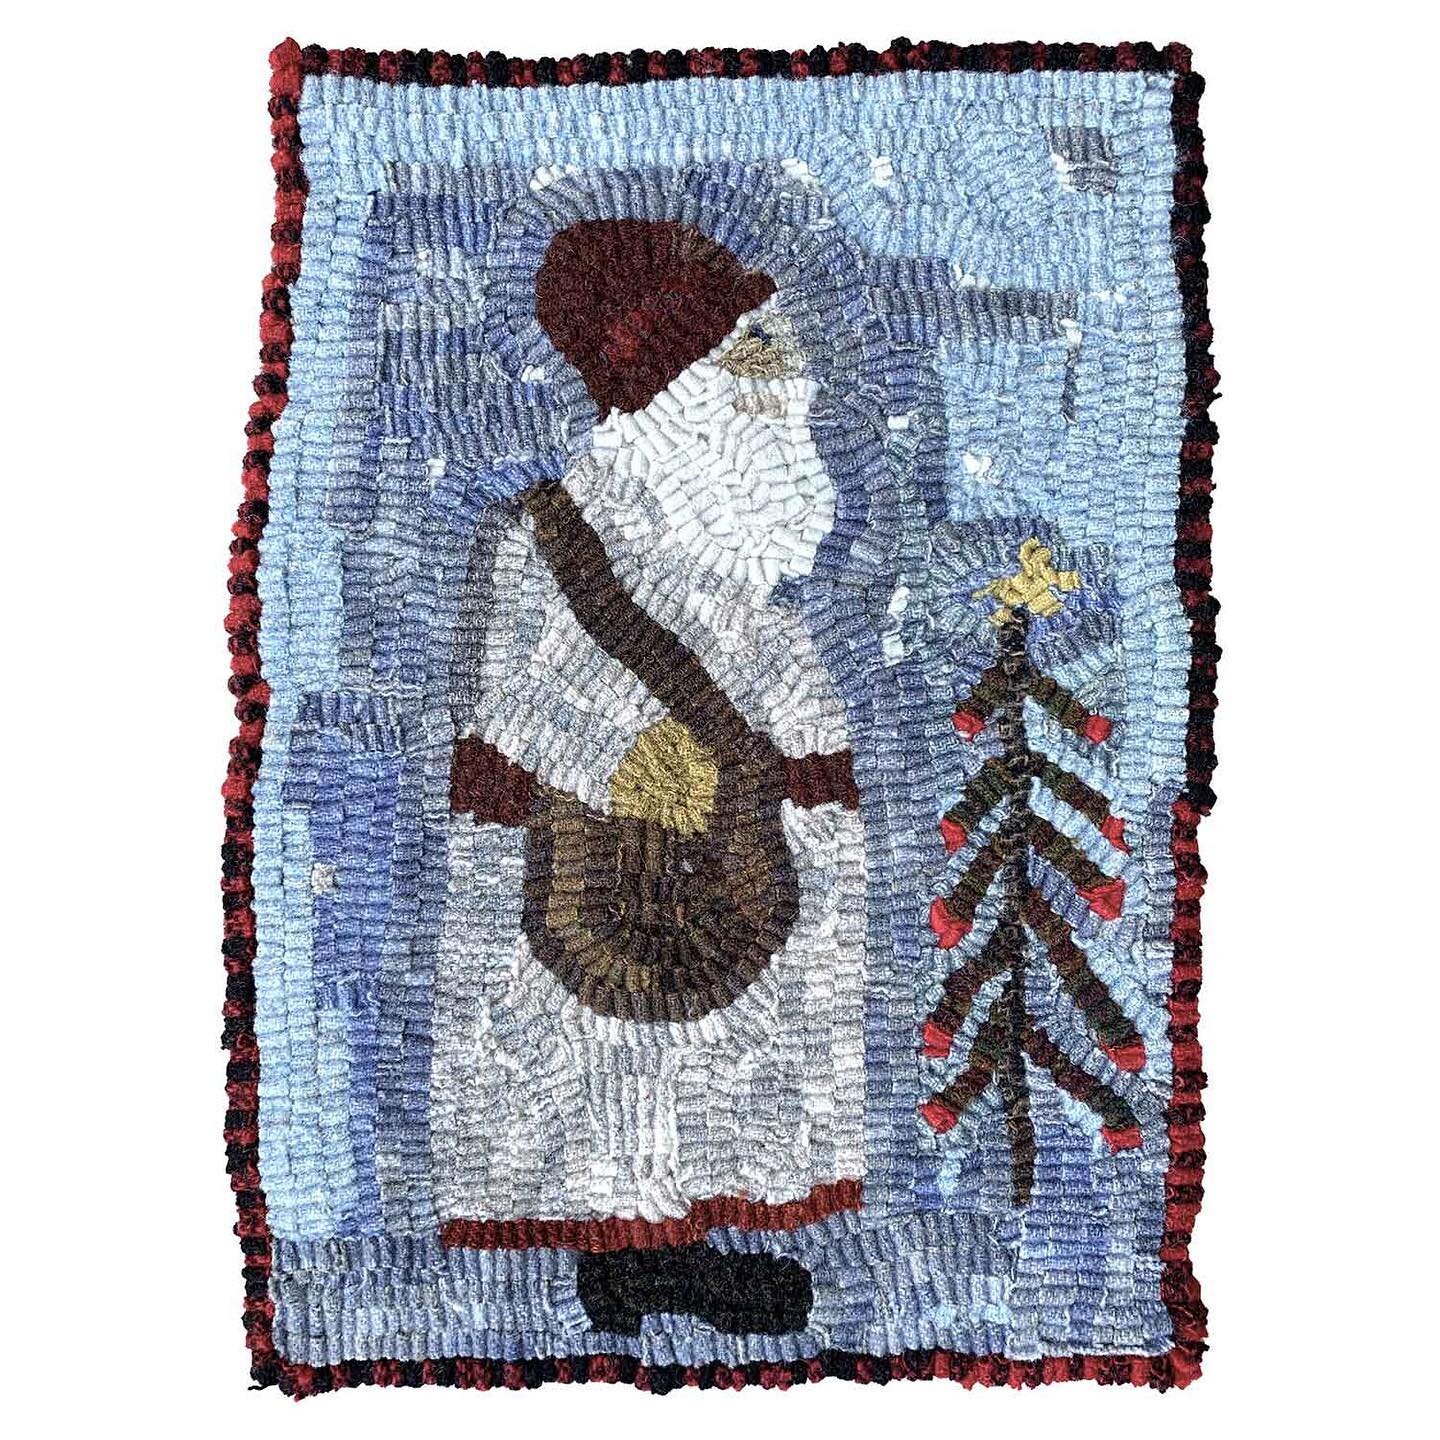 New rug with a Santa in a snowy field. Visit my site through the link in my bio for more details #handmade #hookedrug #primitiverug #holidays #folkart